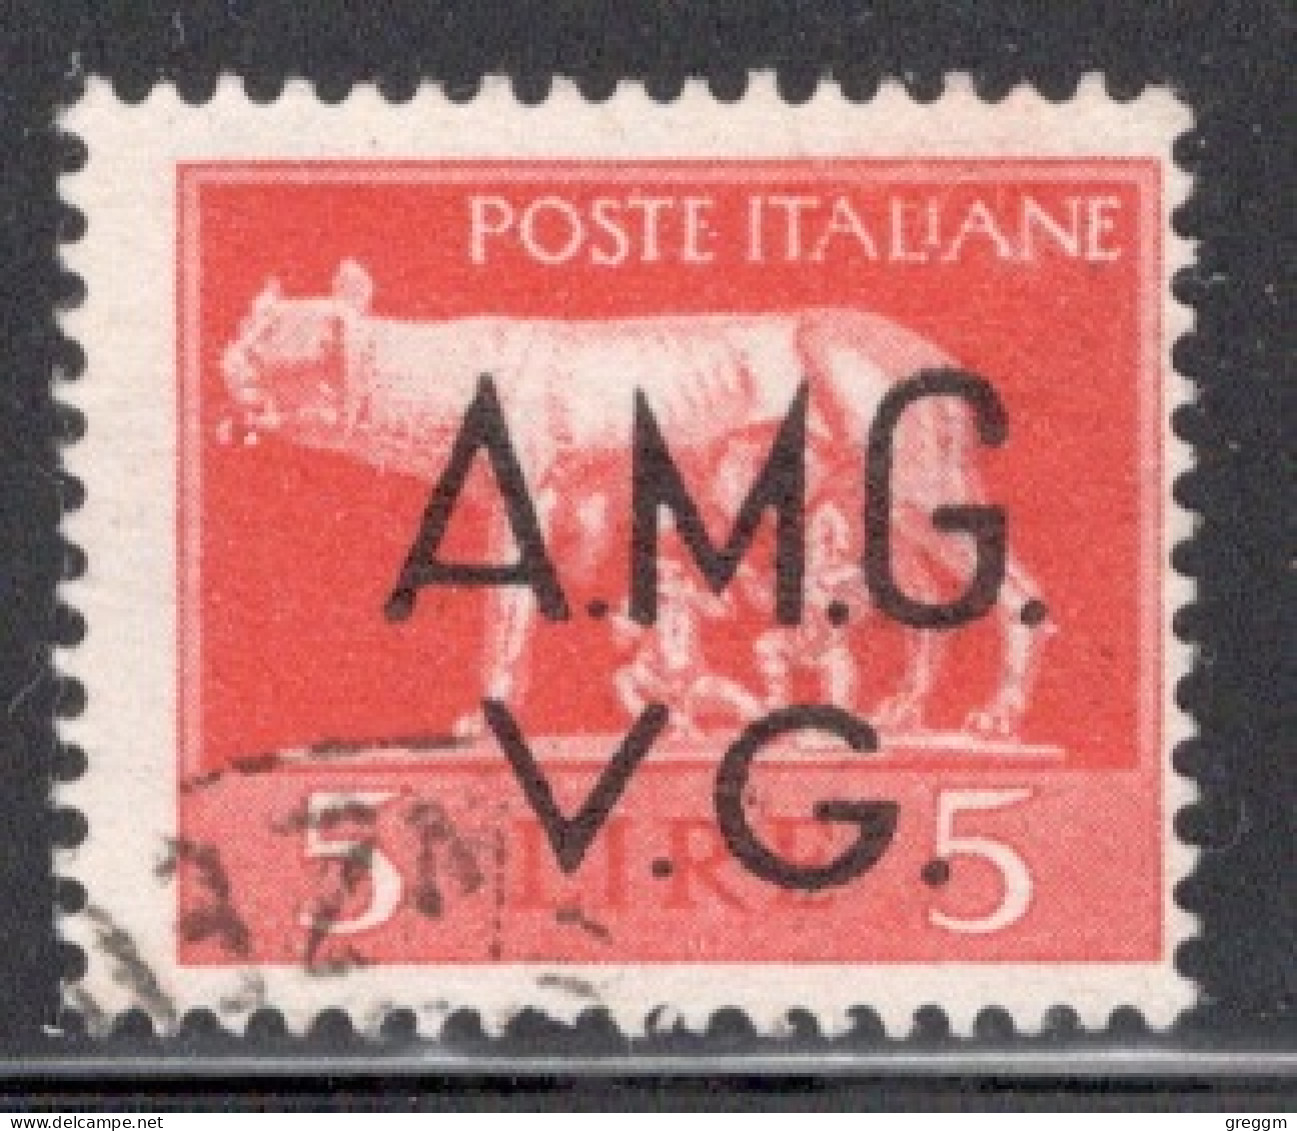 Italy 1945 Postage Stamp Overprinted "A.M.G.V.G." - Watermarked In Fine Used - Usati